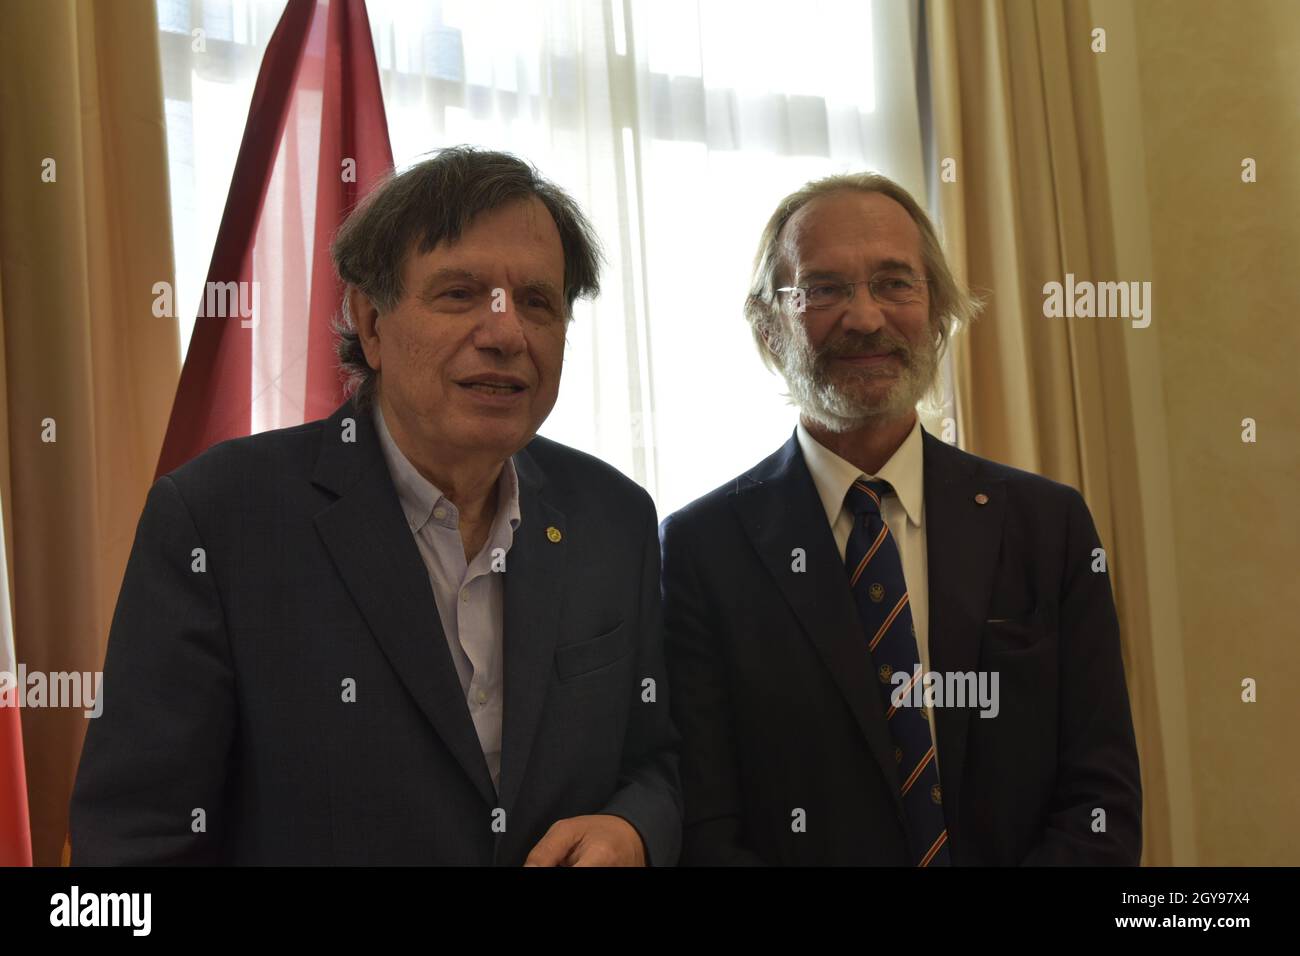 Rome, Italy. 05th Oct, 2021. Greetings from the Nobel Prize winner Giorgio Parisi at the Sapienza Università di Roma academic community after being named one of the winners of the Nobel Prize in Physics, Tuesday 5 October 2021, Rectorate Hall and Physics Building - (Photo by Stefania Sepulcri/Sapienza Università di Roma via Credit: Sipa USA/Alamy Live News Stock Photo